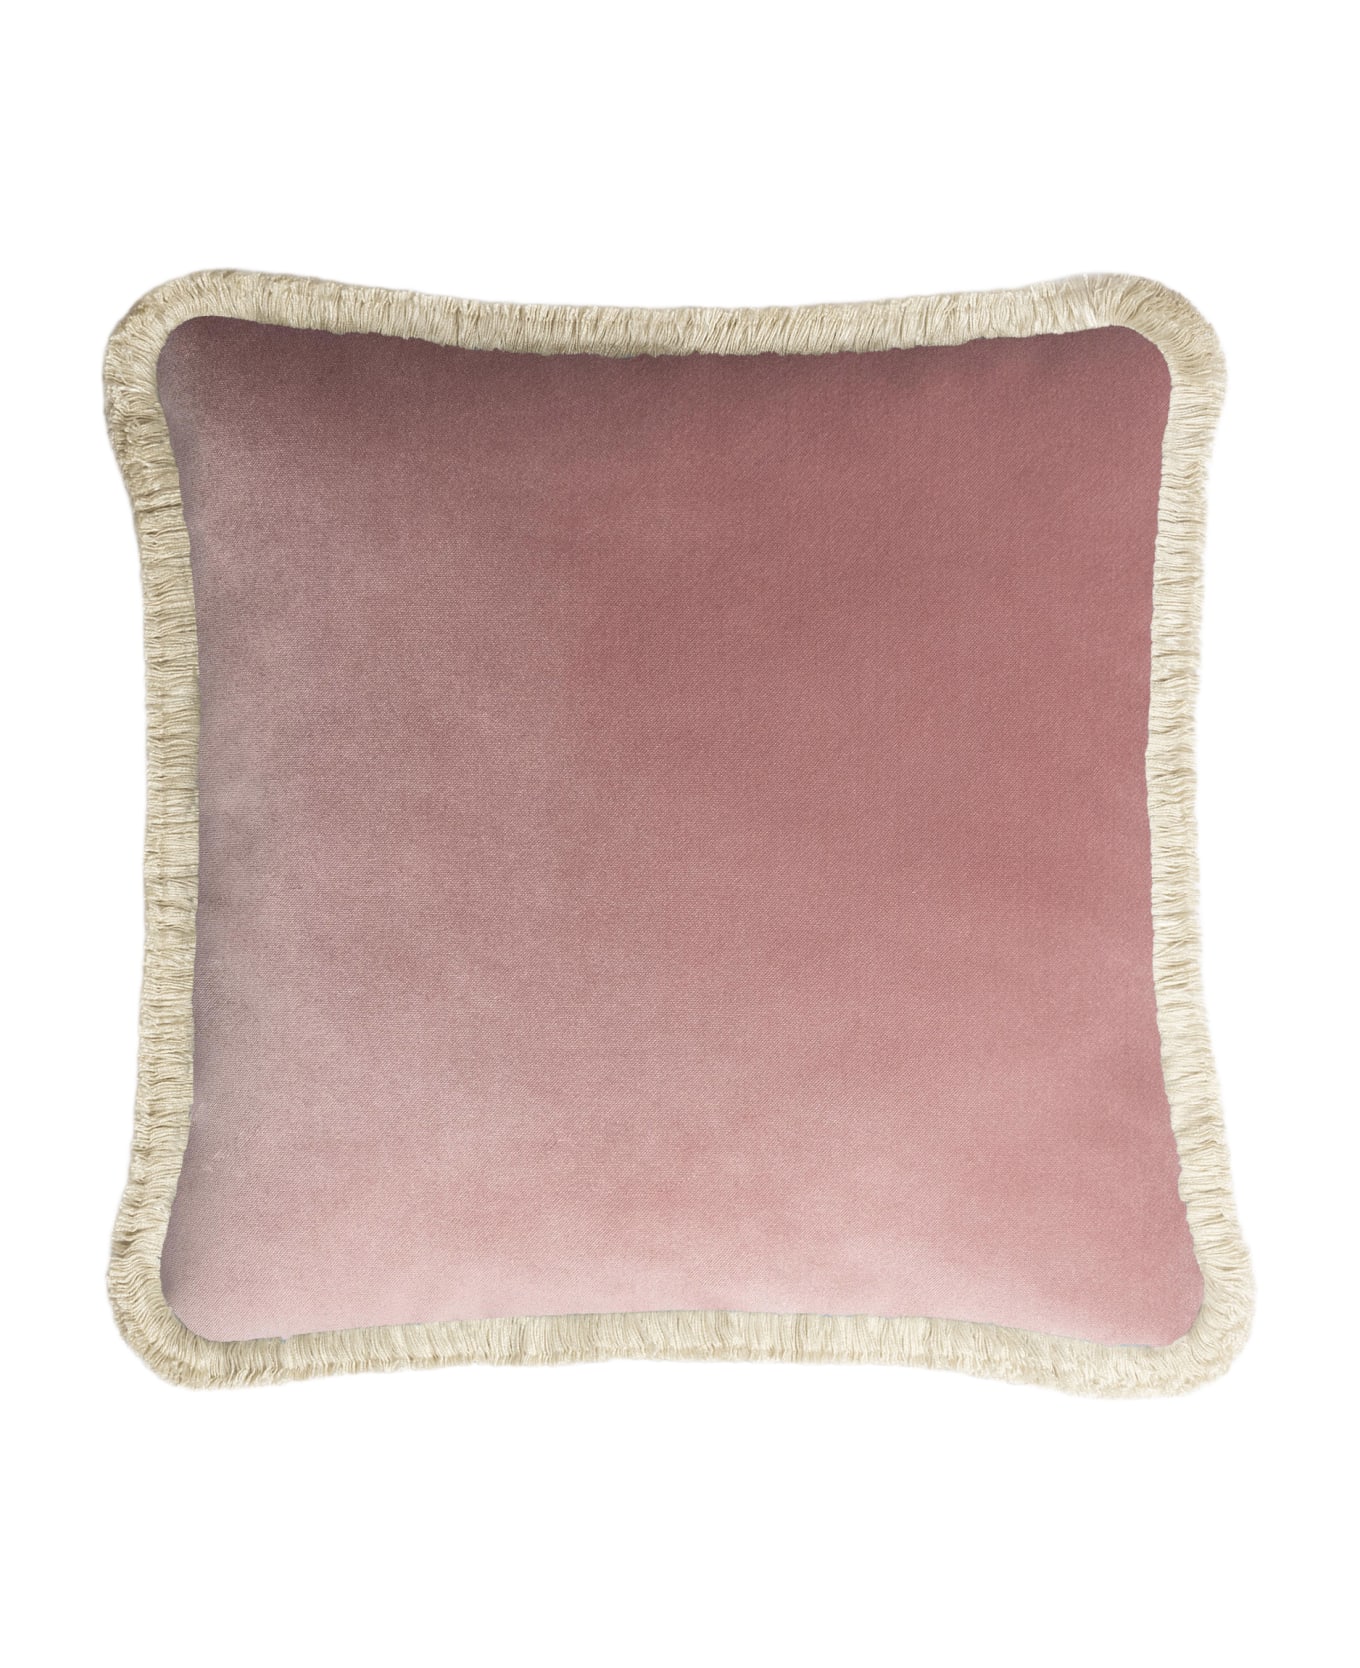 Lo Decor Happy Pillow Pink Velvet Dirty White Fringes - pink / dirty white